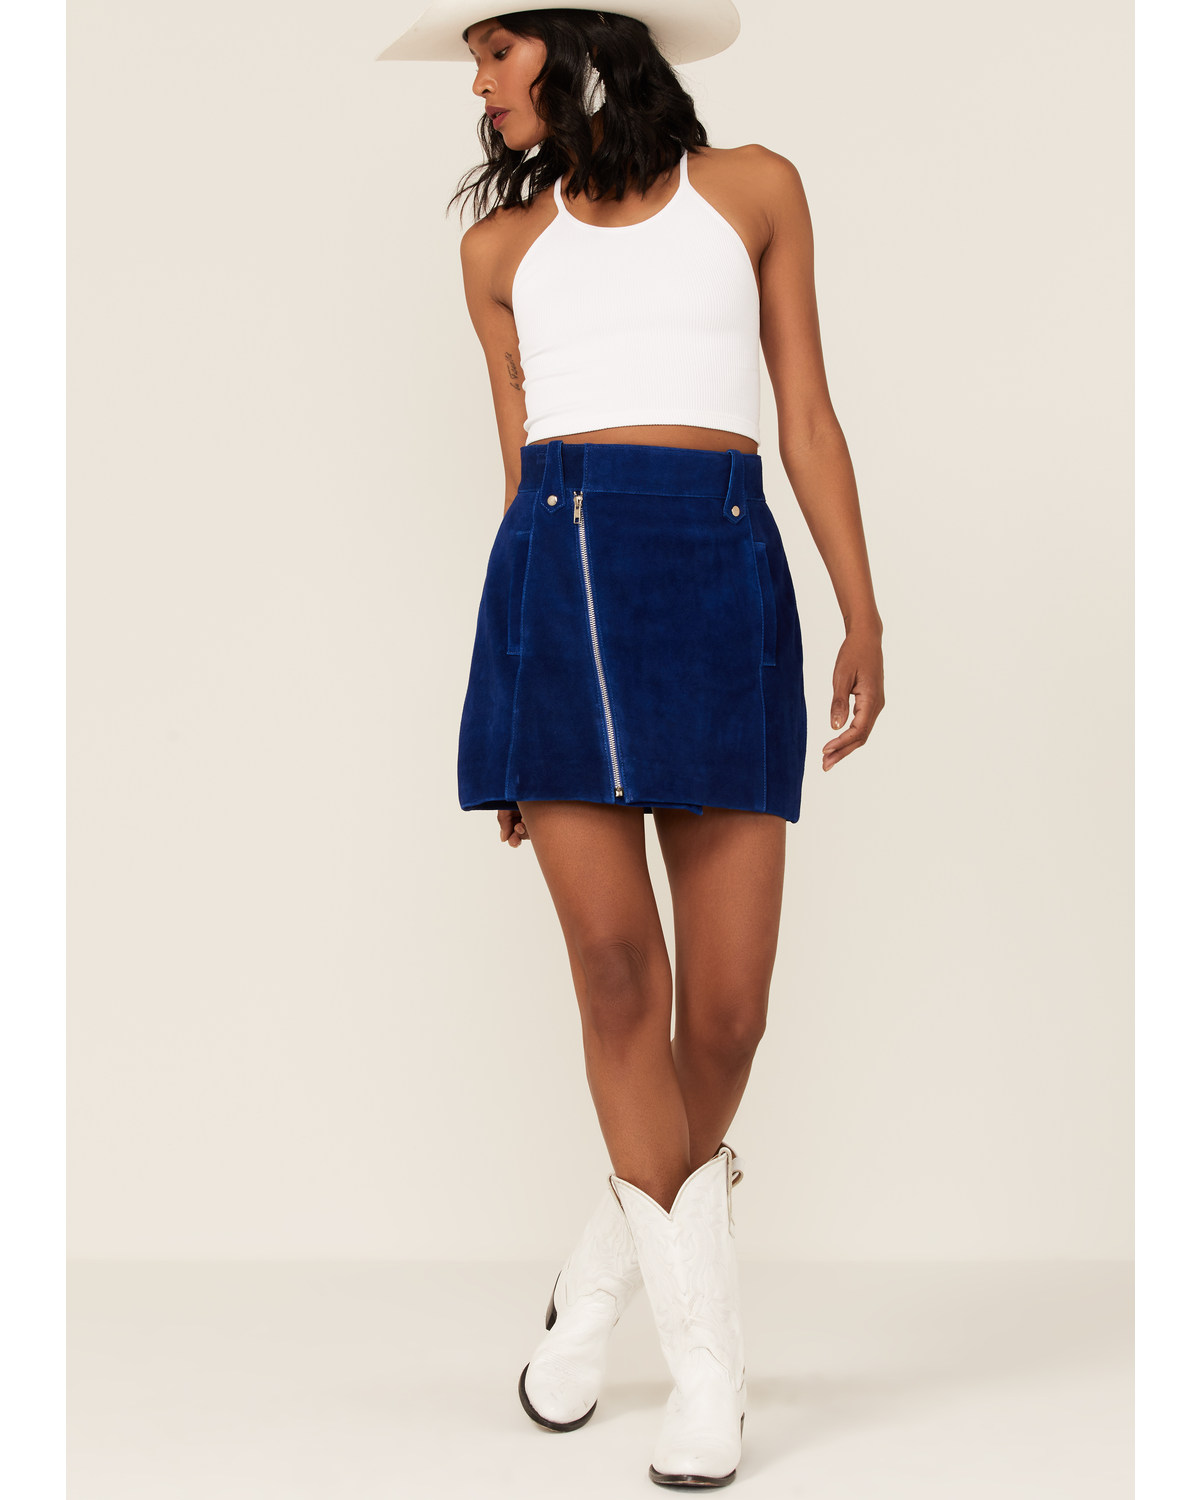 Understated Leather Women's City Slickers Suede Mini Skirt